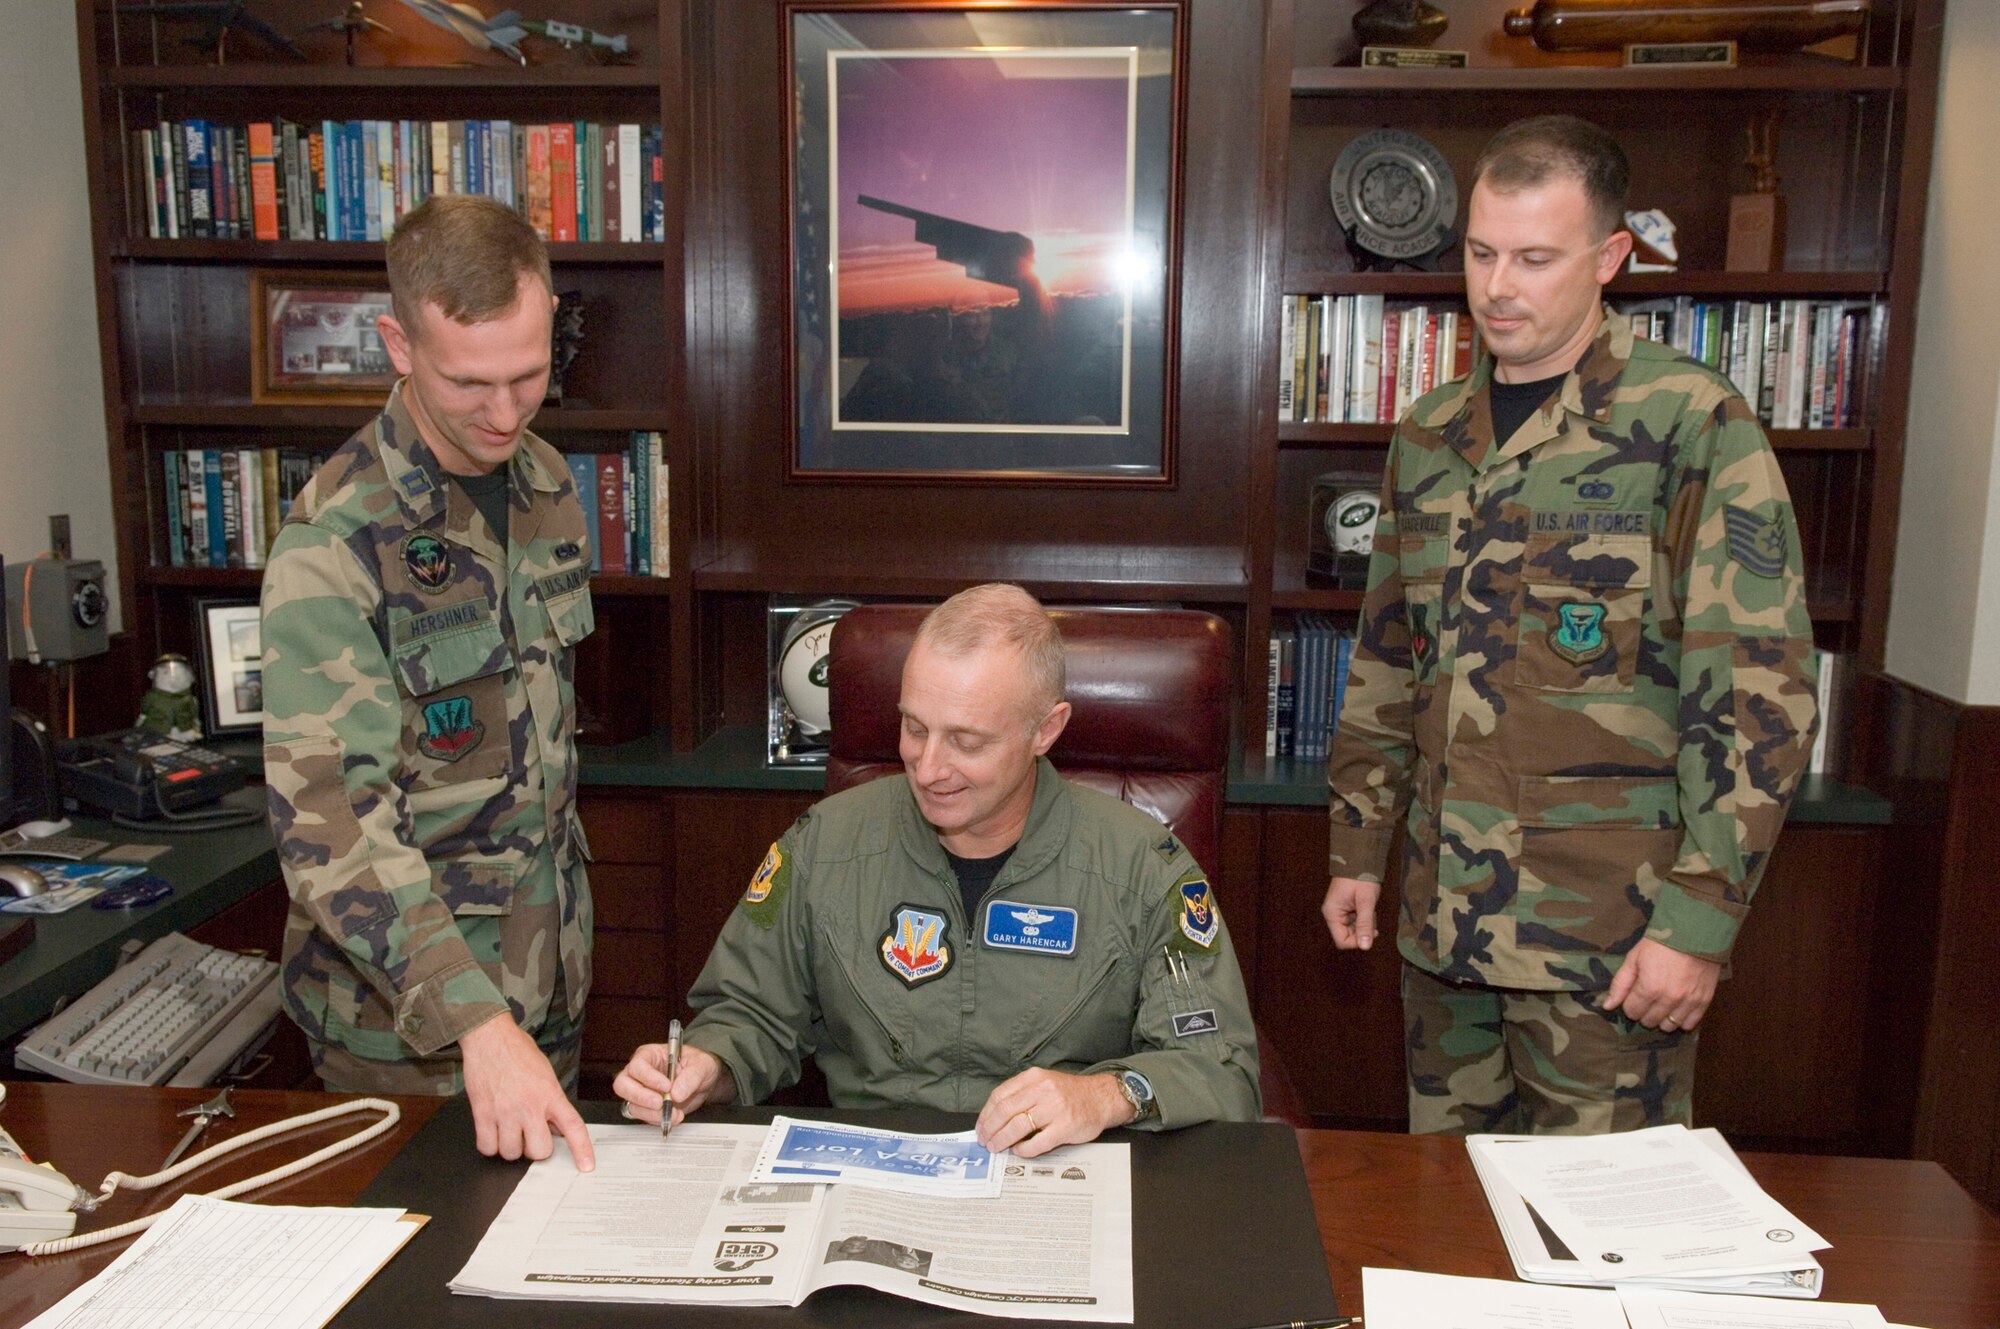 (Center) Col. Garrett Harencak, 509th Bomb Wing commander, signs his contribution for the 2007 Combined Federal Campaign as Capt. Robert Hershner (left), 509th Bomb Wing CFC manager, and Tech. Sgt. Justin Mandeville (right), 509th BW Staff CFC representative, look on. CFC is the world's largest and most successful annual workplace charity campaign, with more than 300 CFC campaigns throughout the country and internationally to help to raise millions of dollars each year. Pledges can be made by military donors during the campaign season, which runs from Oct. 4 - Dec. 15, to support eligible non-profit organizations that provide health and human service benefits throughout the world. (U.S. Air Force photo/A1C Stephen Linch)

